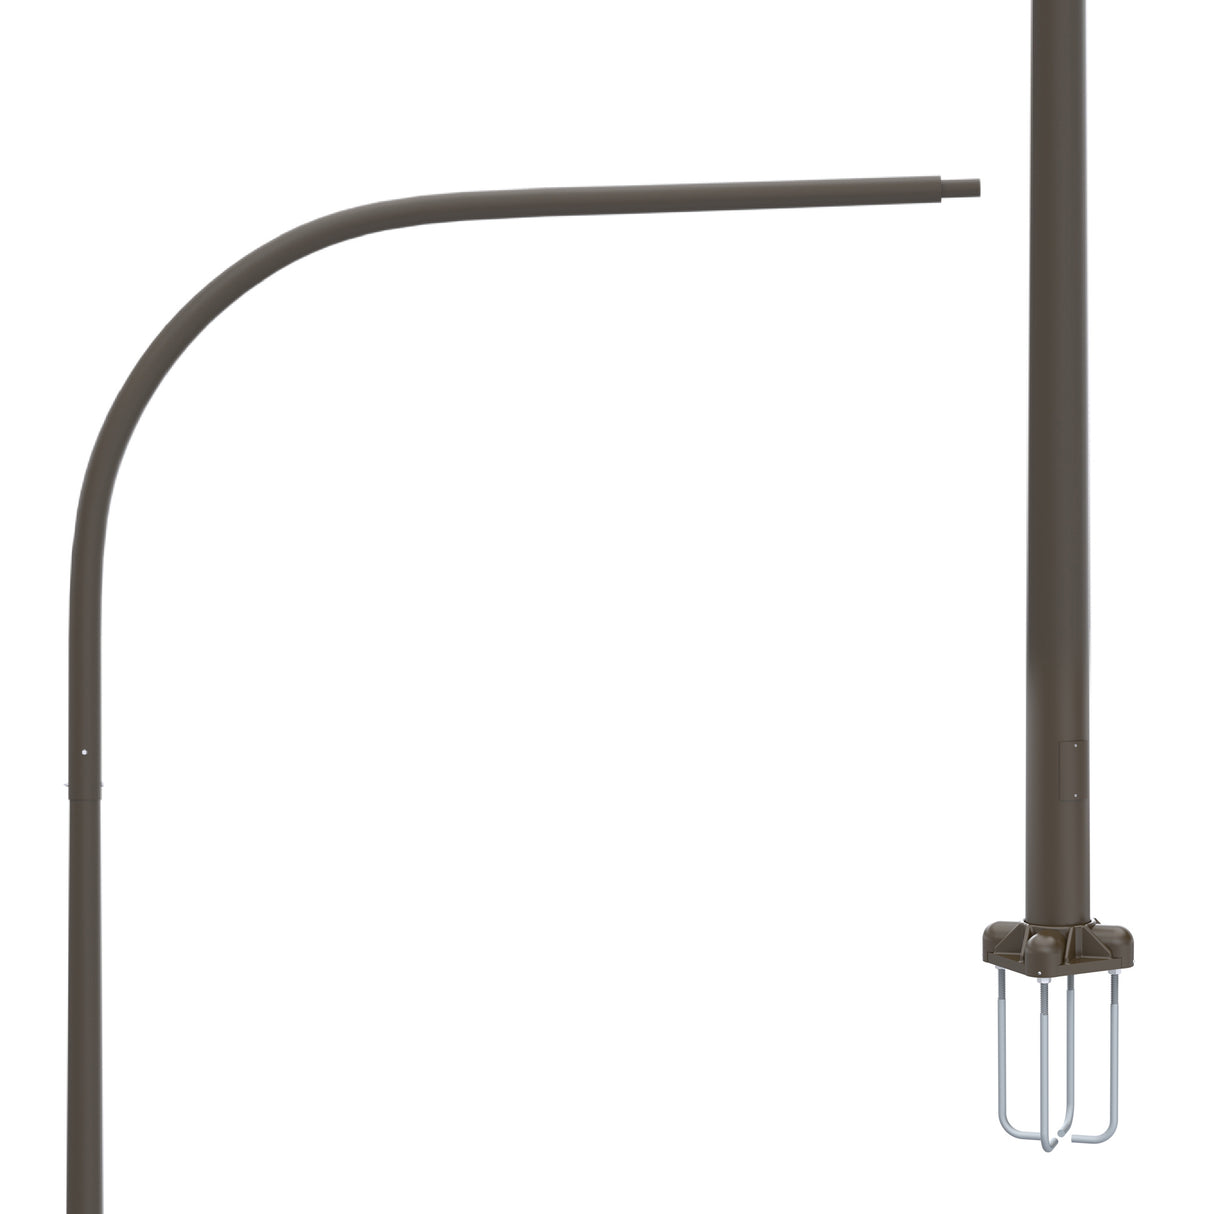 40' Tall x 8.0" Base OD x 4.5" Top OD x 0.188" Thick, Round Tapered Aluminum, Anchor Base Light Pole with 10' Davit Arm